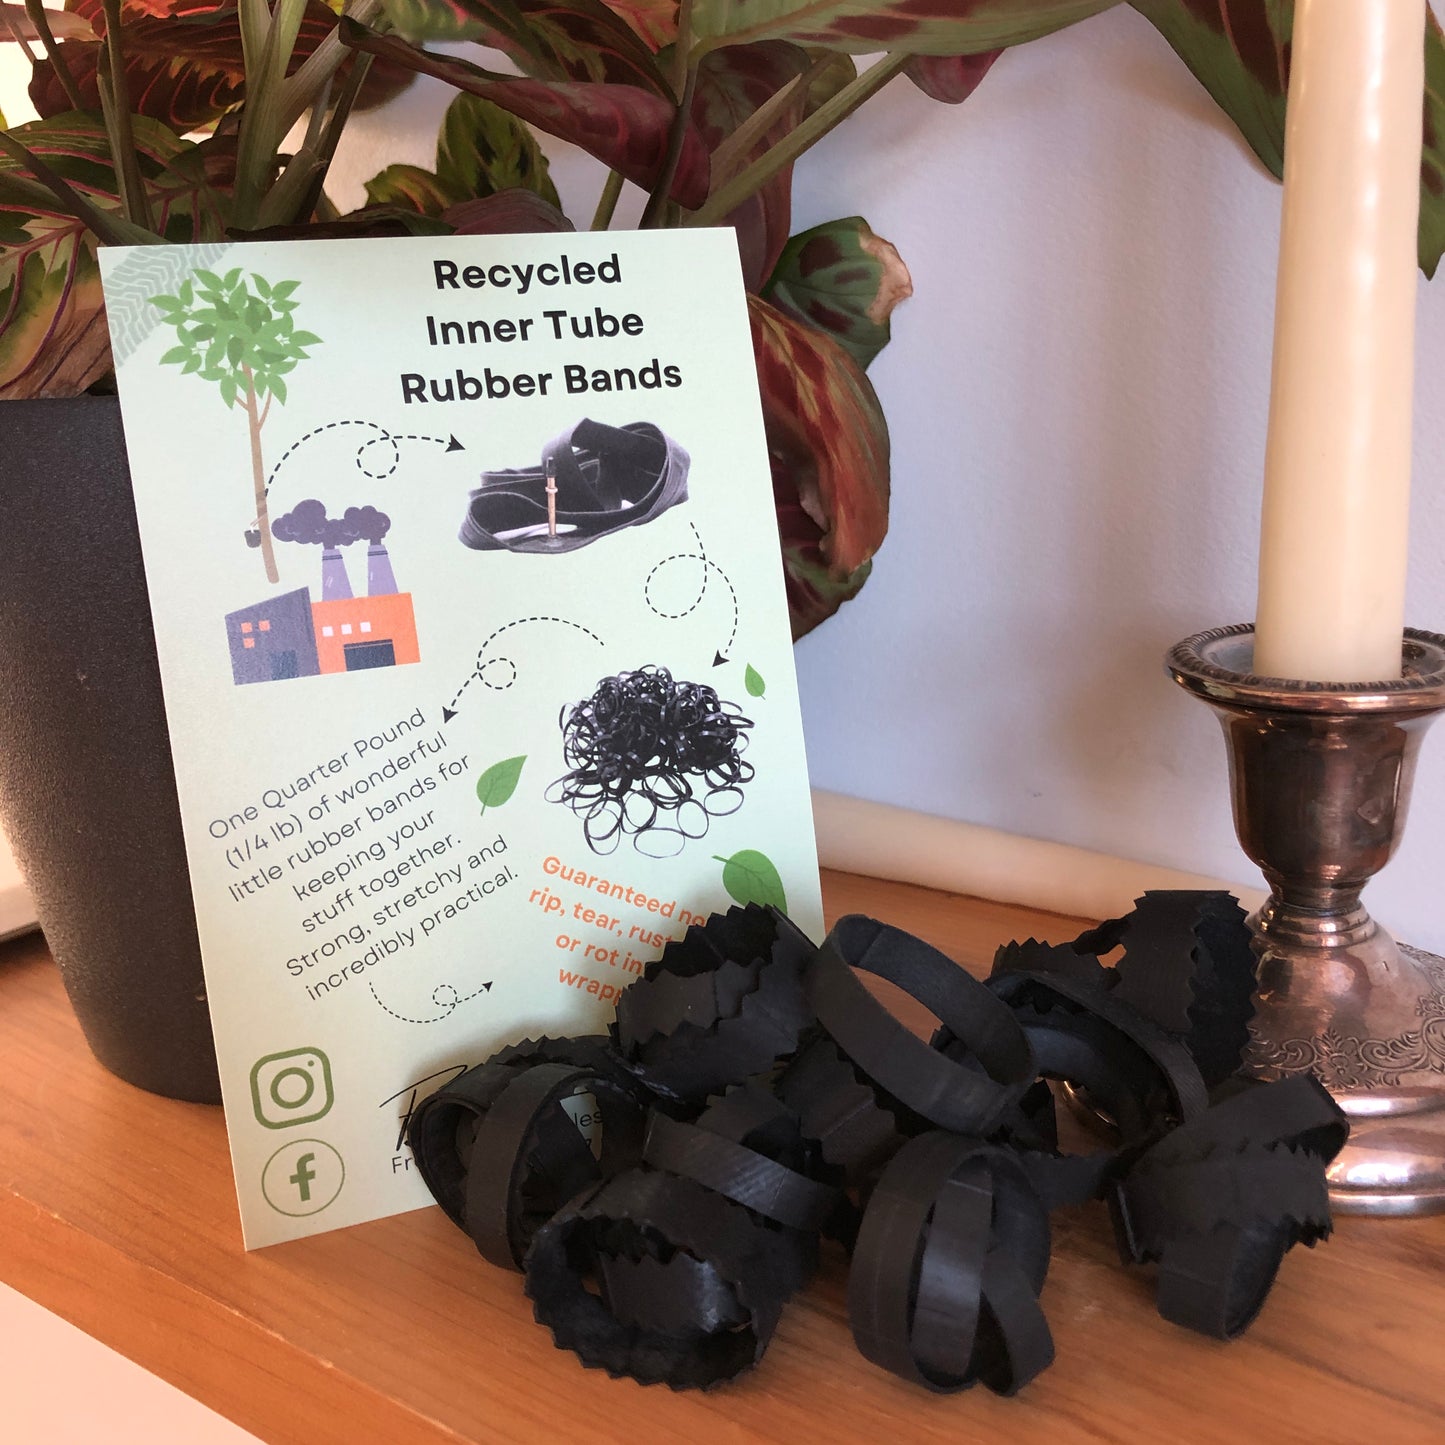 Recycled Inner Tube Rubber Bands